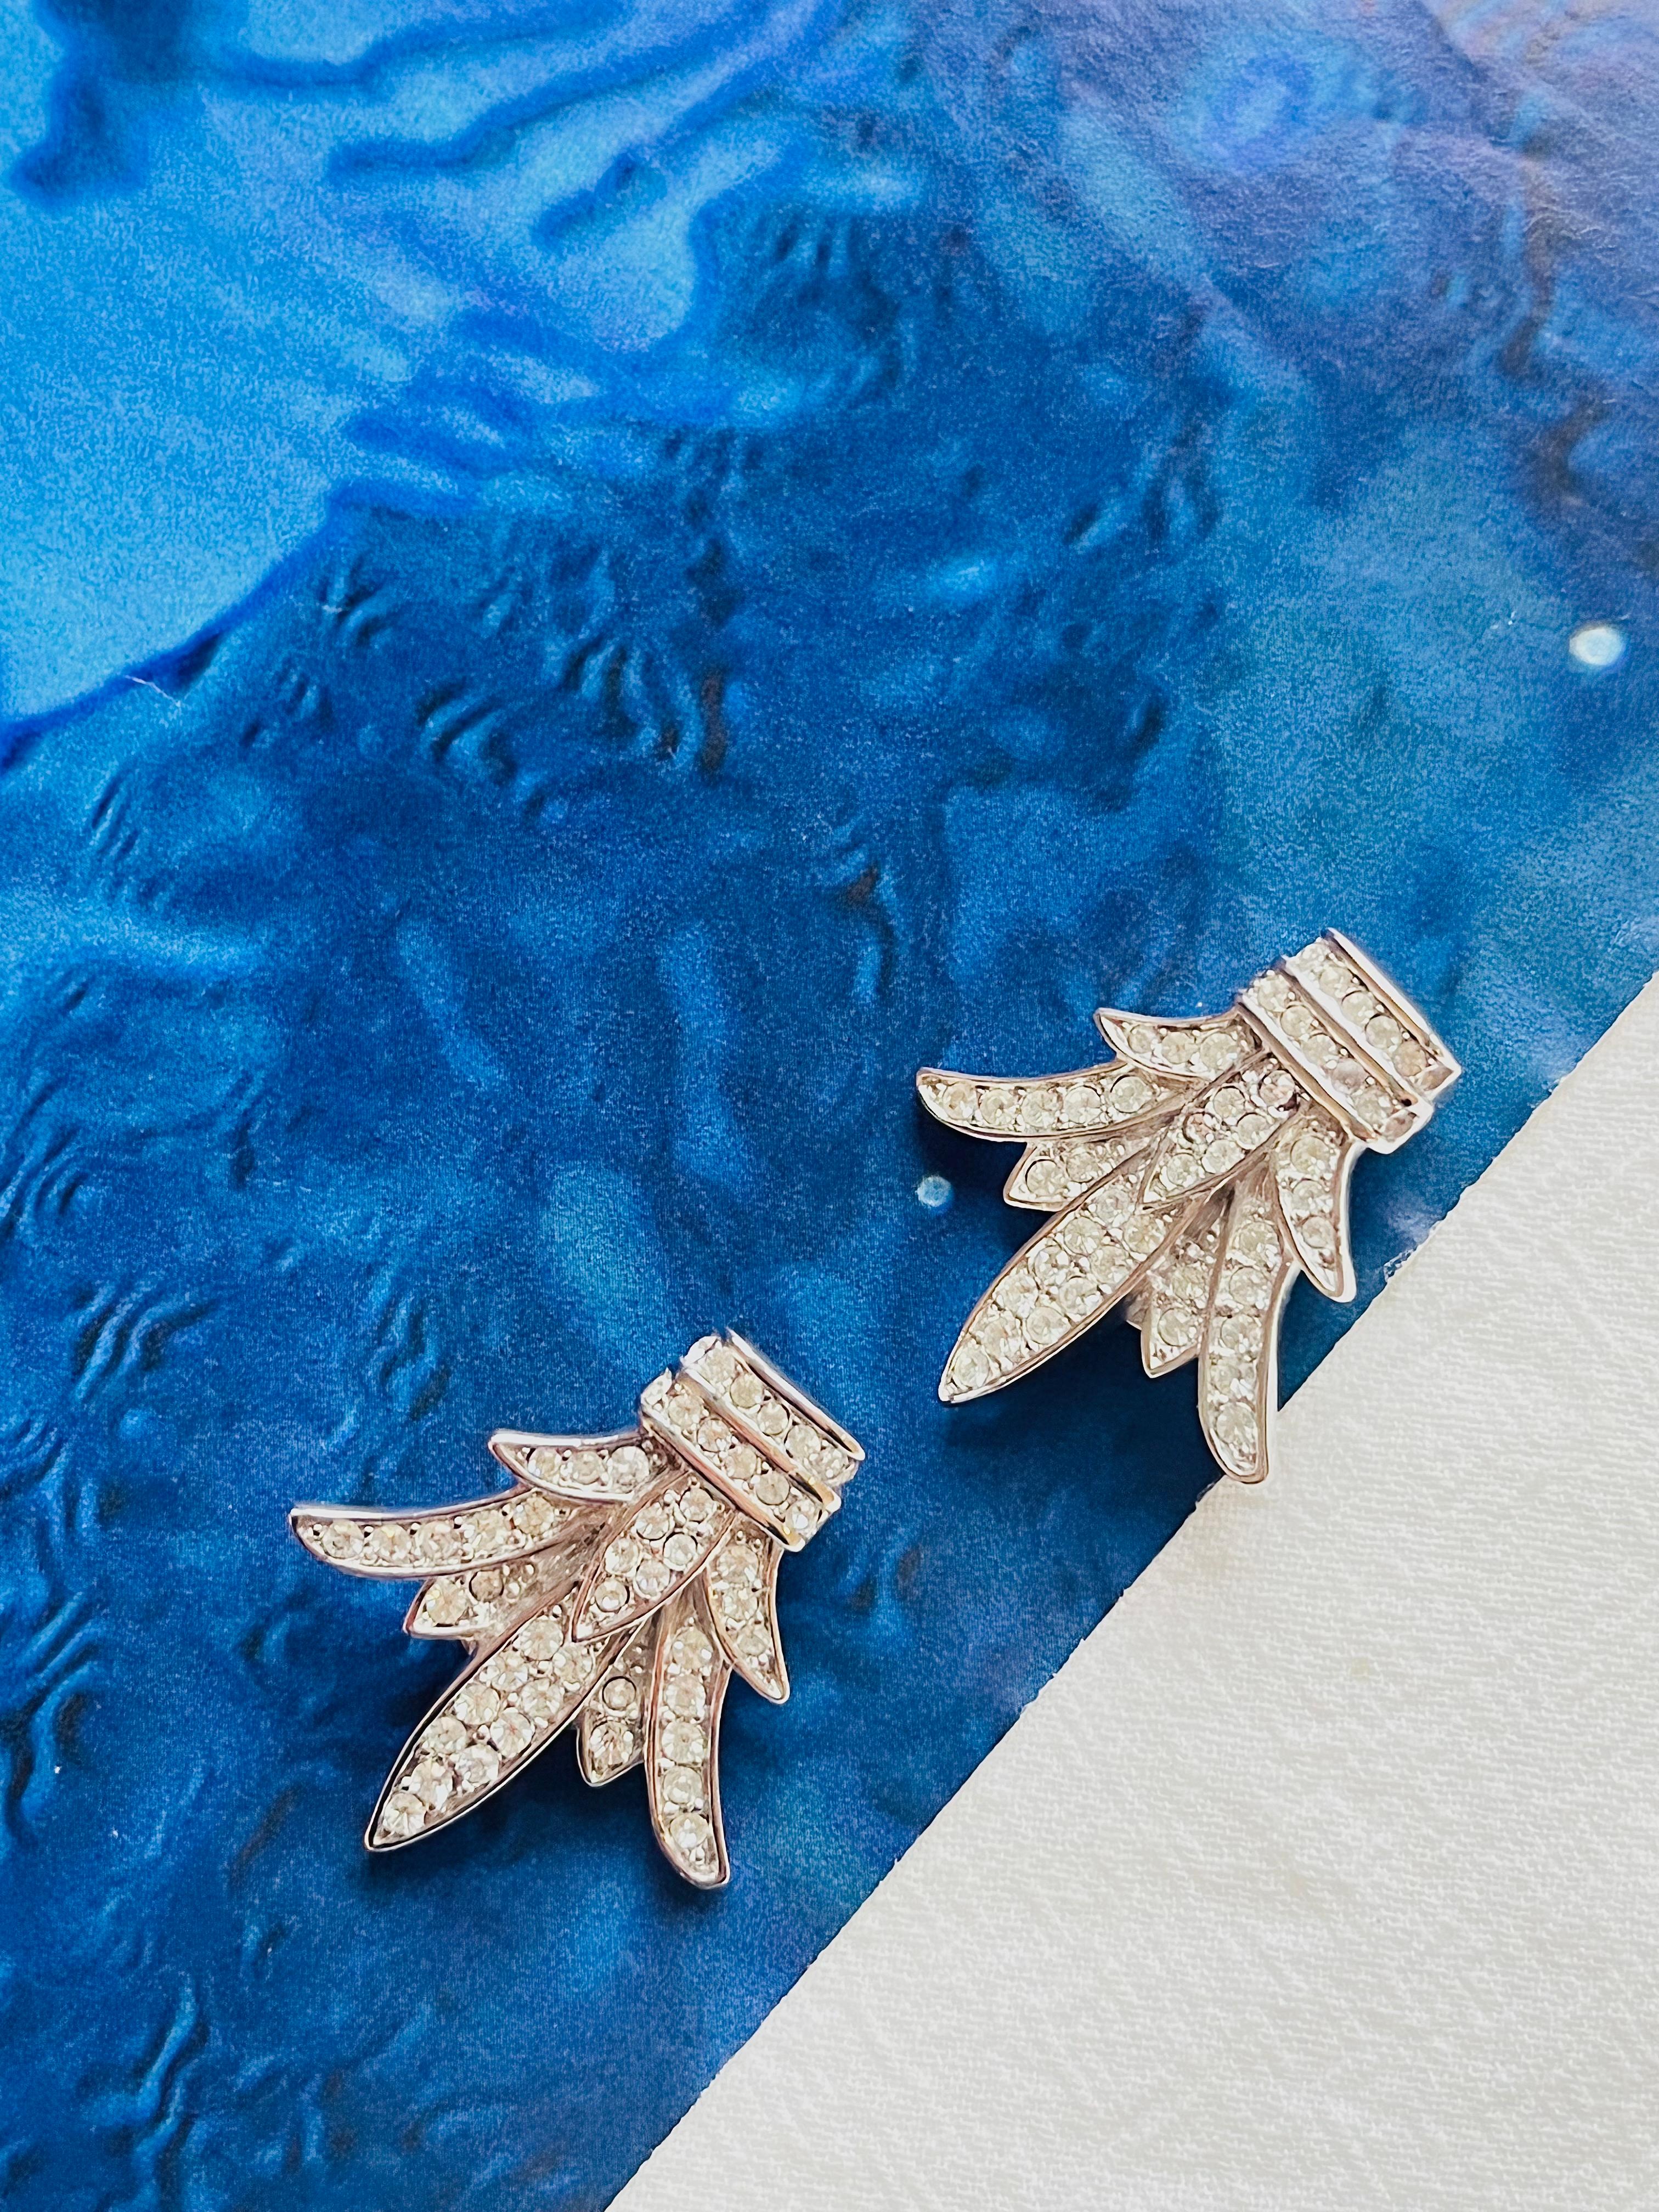 Christian Dior Vintage 1960s Fleur De Lis Crystals Lily Flower Leaf Earrings In Excellent Condition For Sale In Wokingham, England